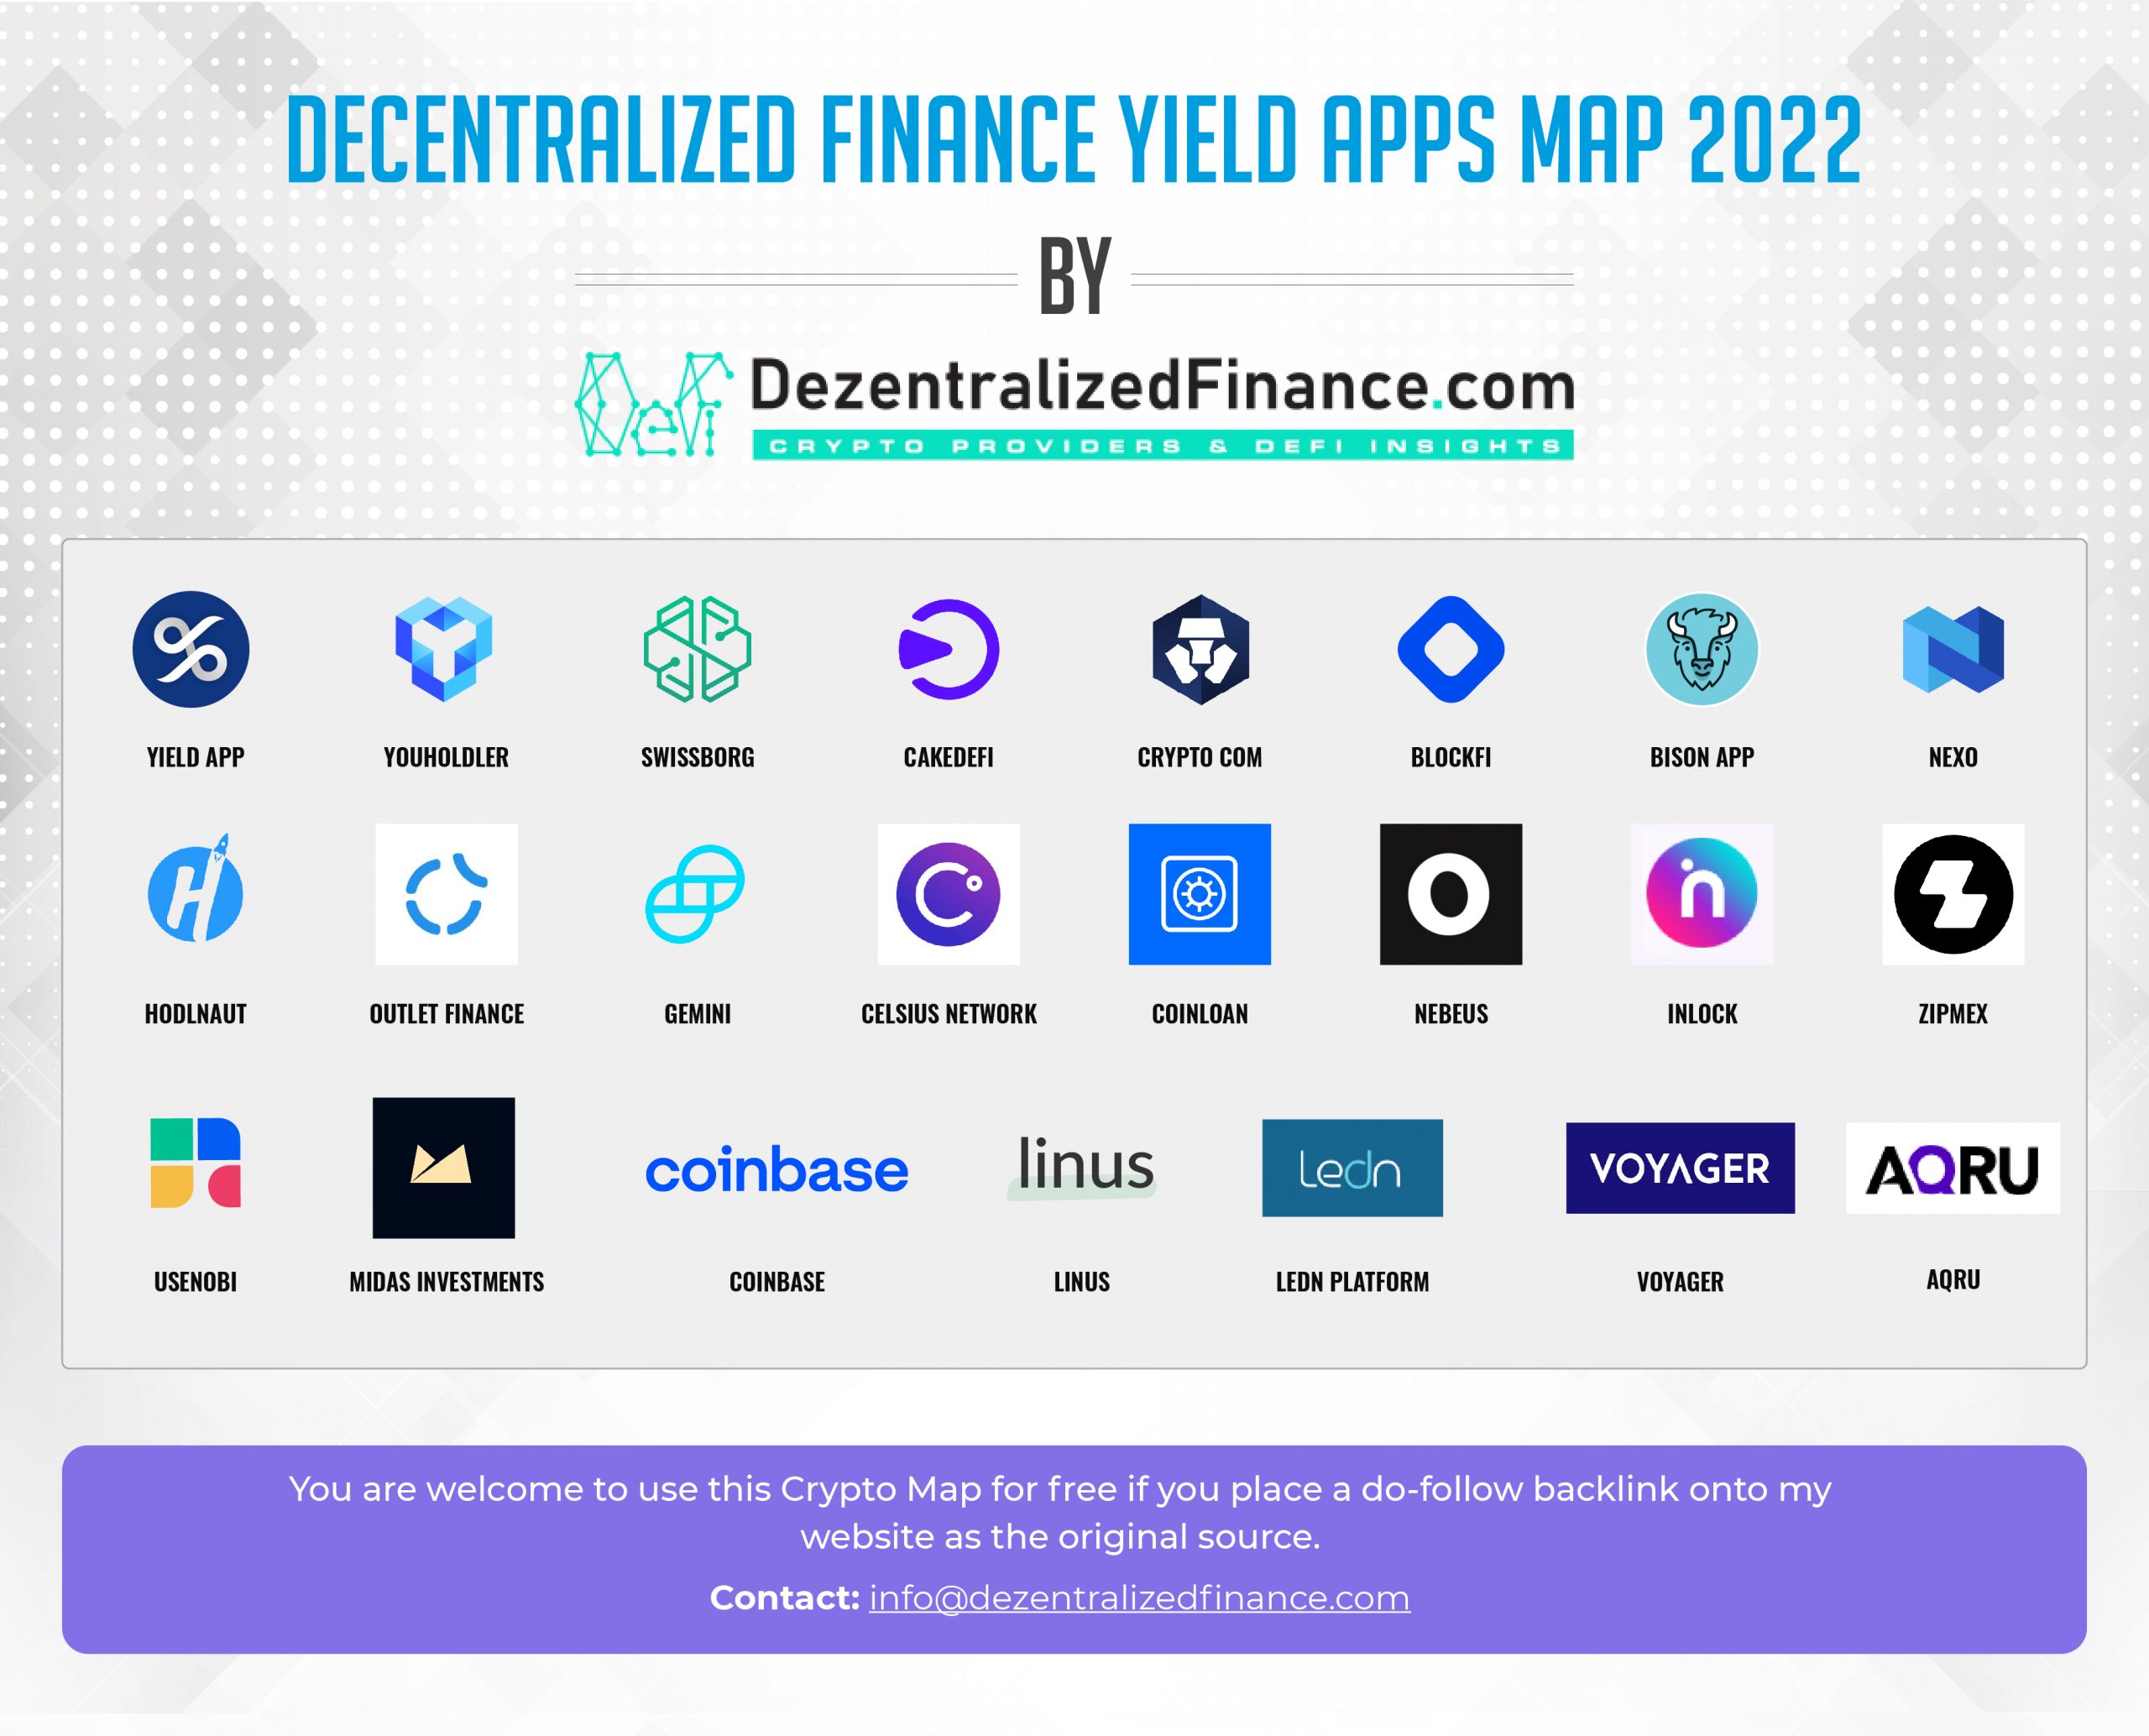 defi yield apps scaled